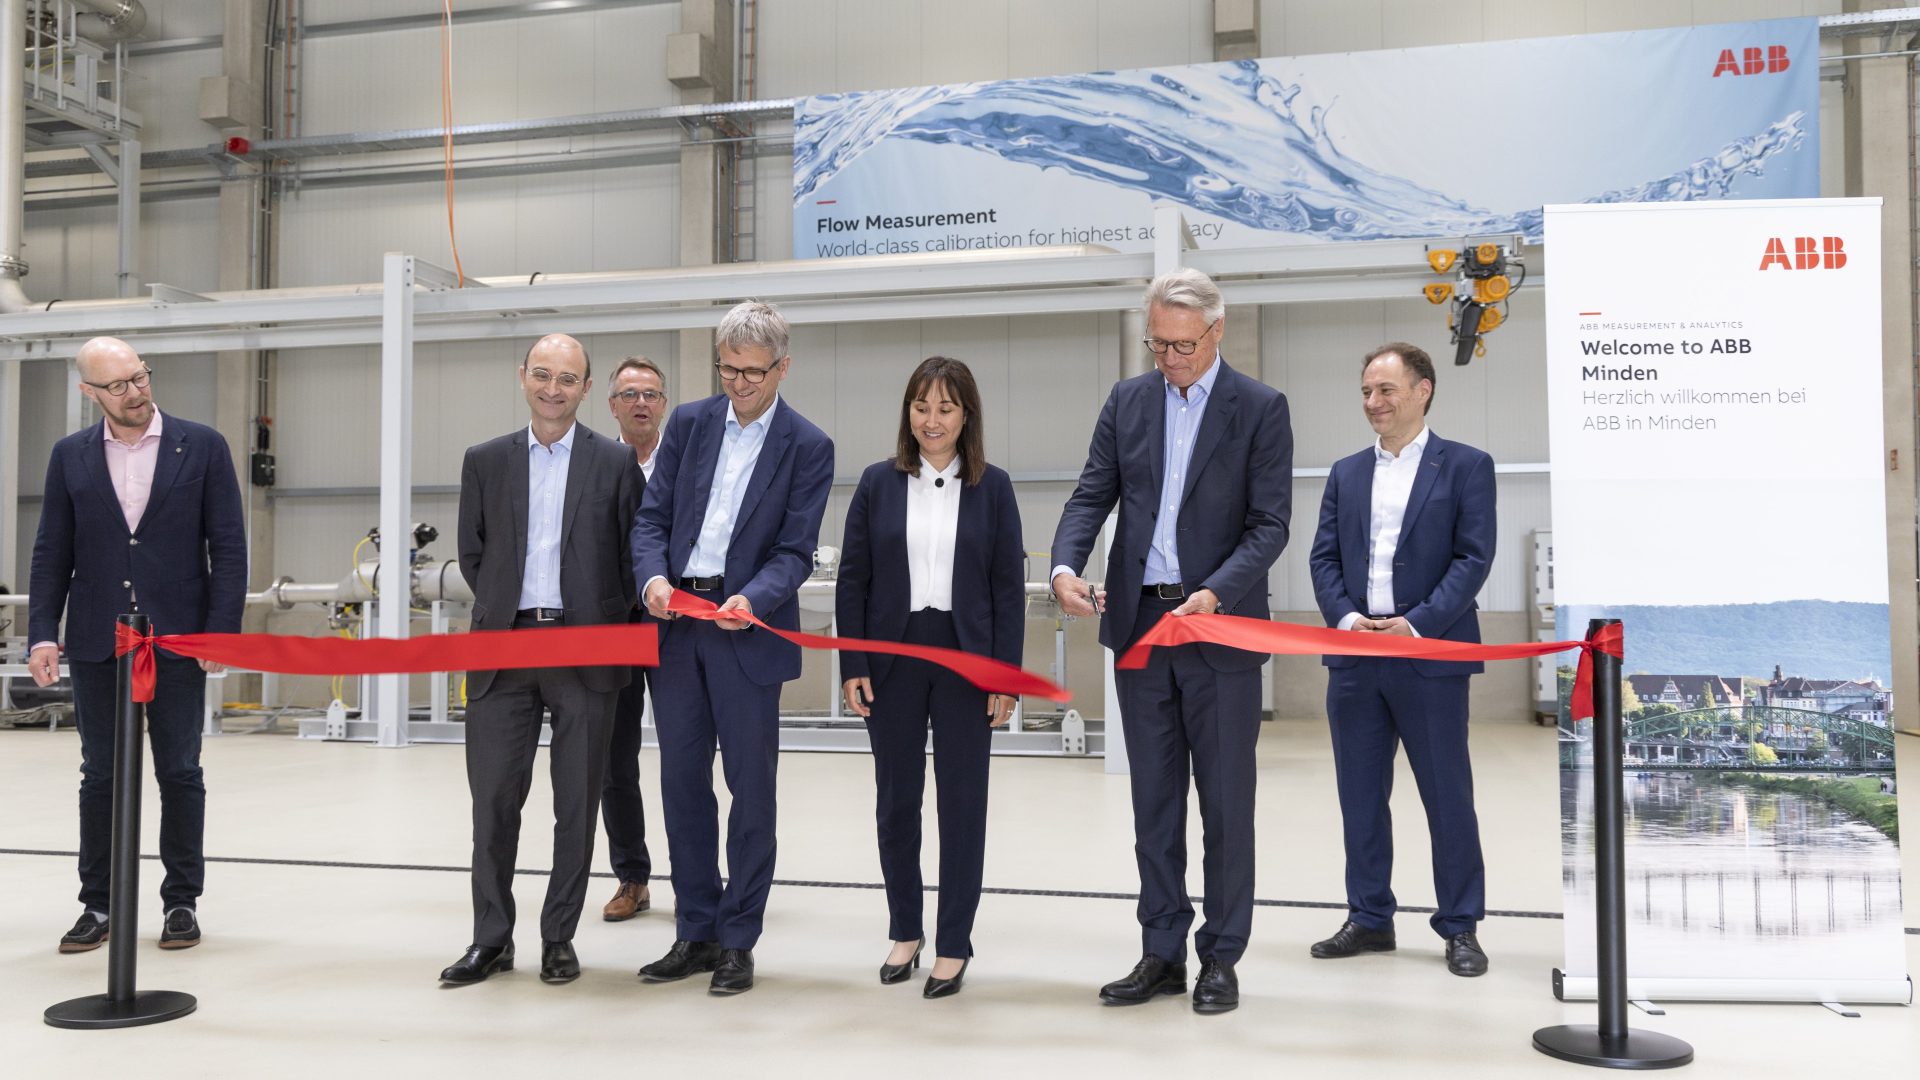 In a ceremony in Minden, ABB CEO Björn Rosengren cut the ribbon to the new calibration hall in the presence of ABB’s Peter Terwiesch, Business Area President, Process Automation Reiner Seecker, Factory Manager, Minden; Jacques Mulbert, Division President, Measurement & Analytics, and Amina Hamidi, Business Line Manager Instrumentation.